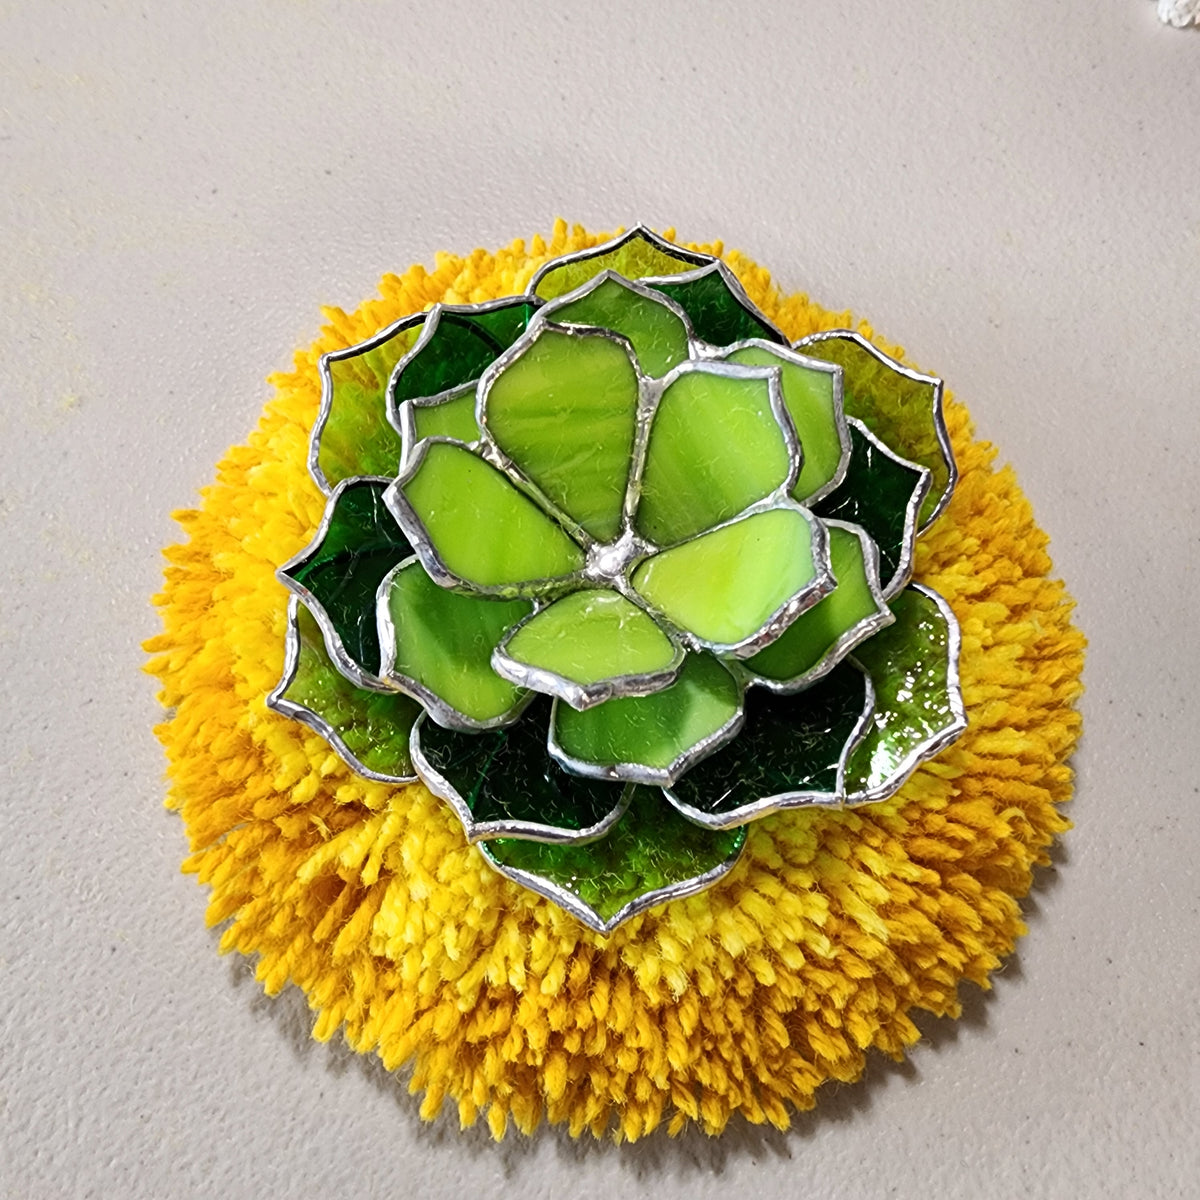 Glass succulent on a fluffy wool Rug